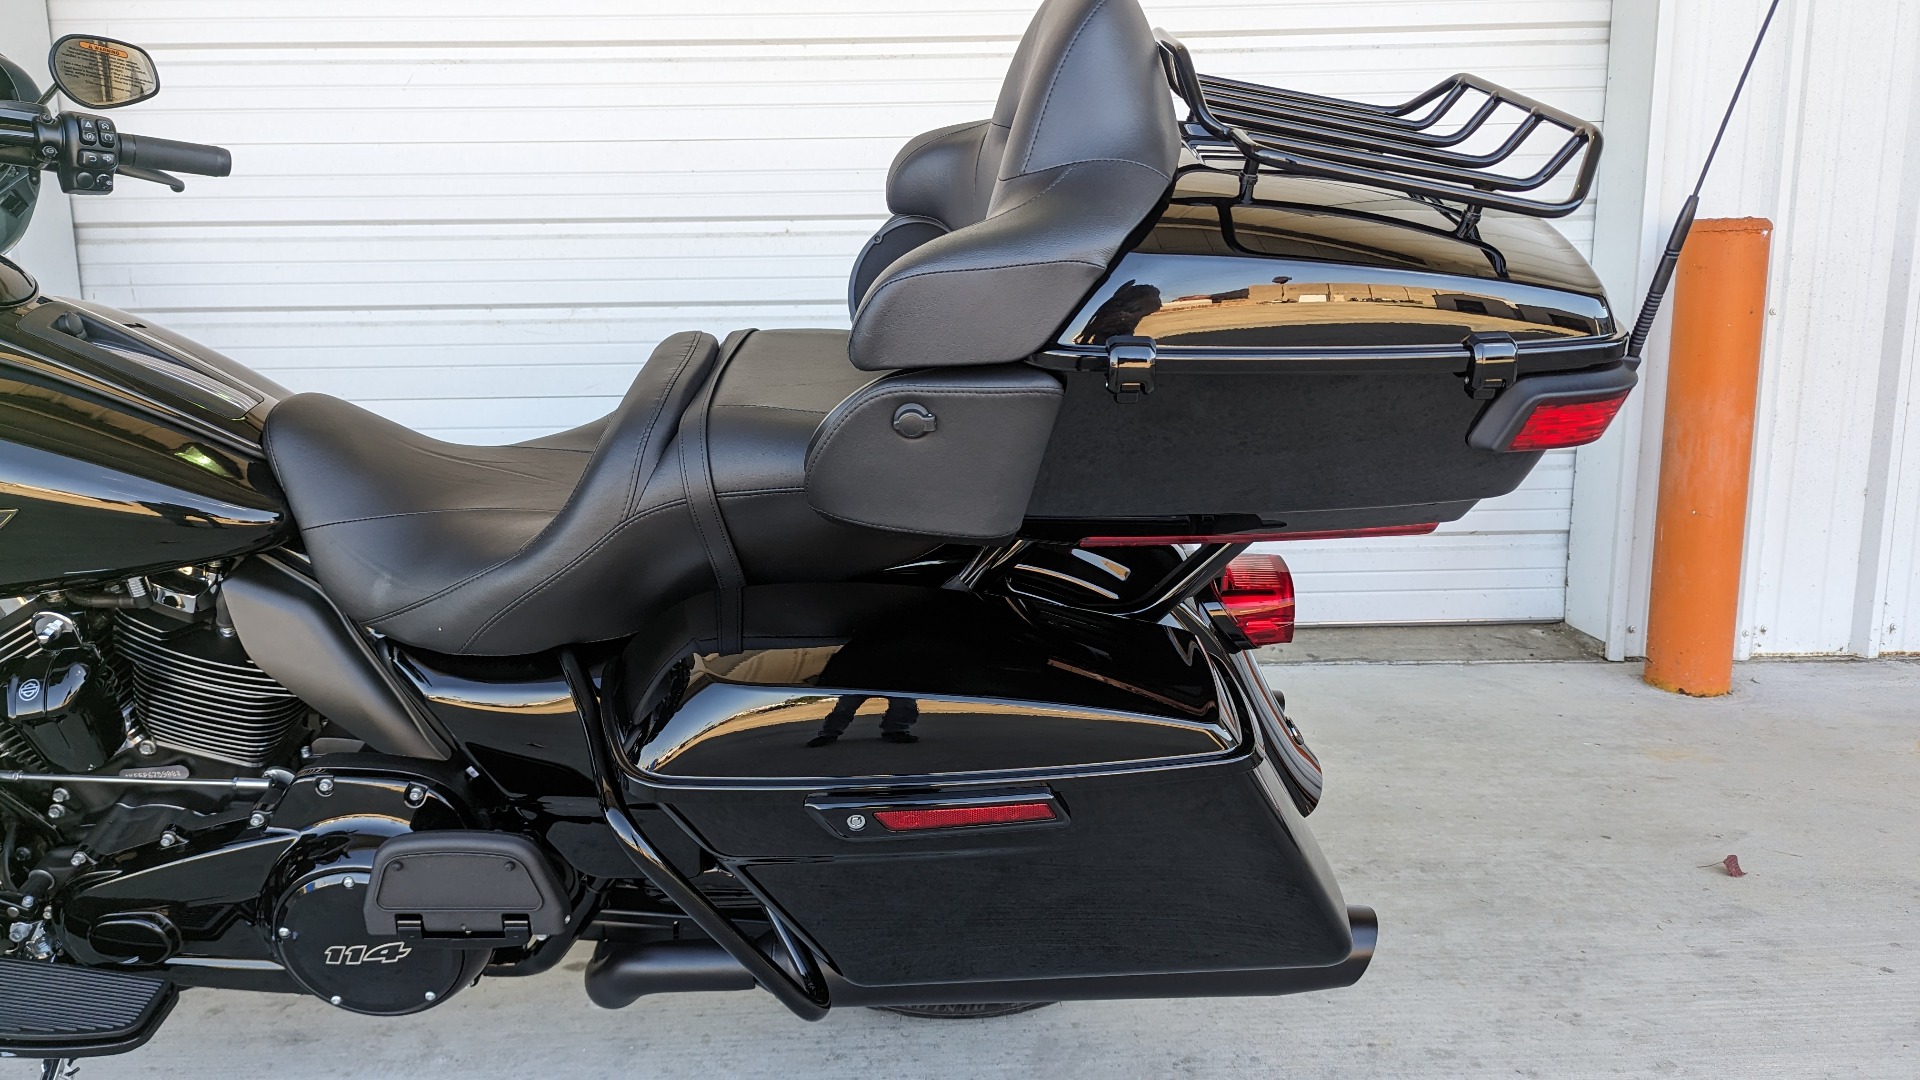 2023 harley davidson ultra limited for sale in little rock - Photo 8